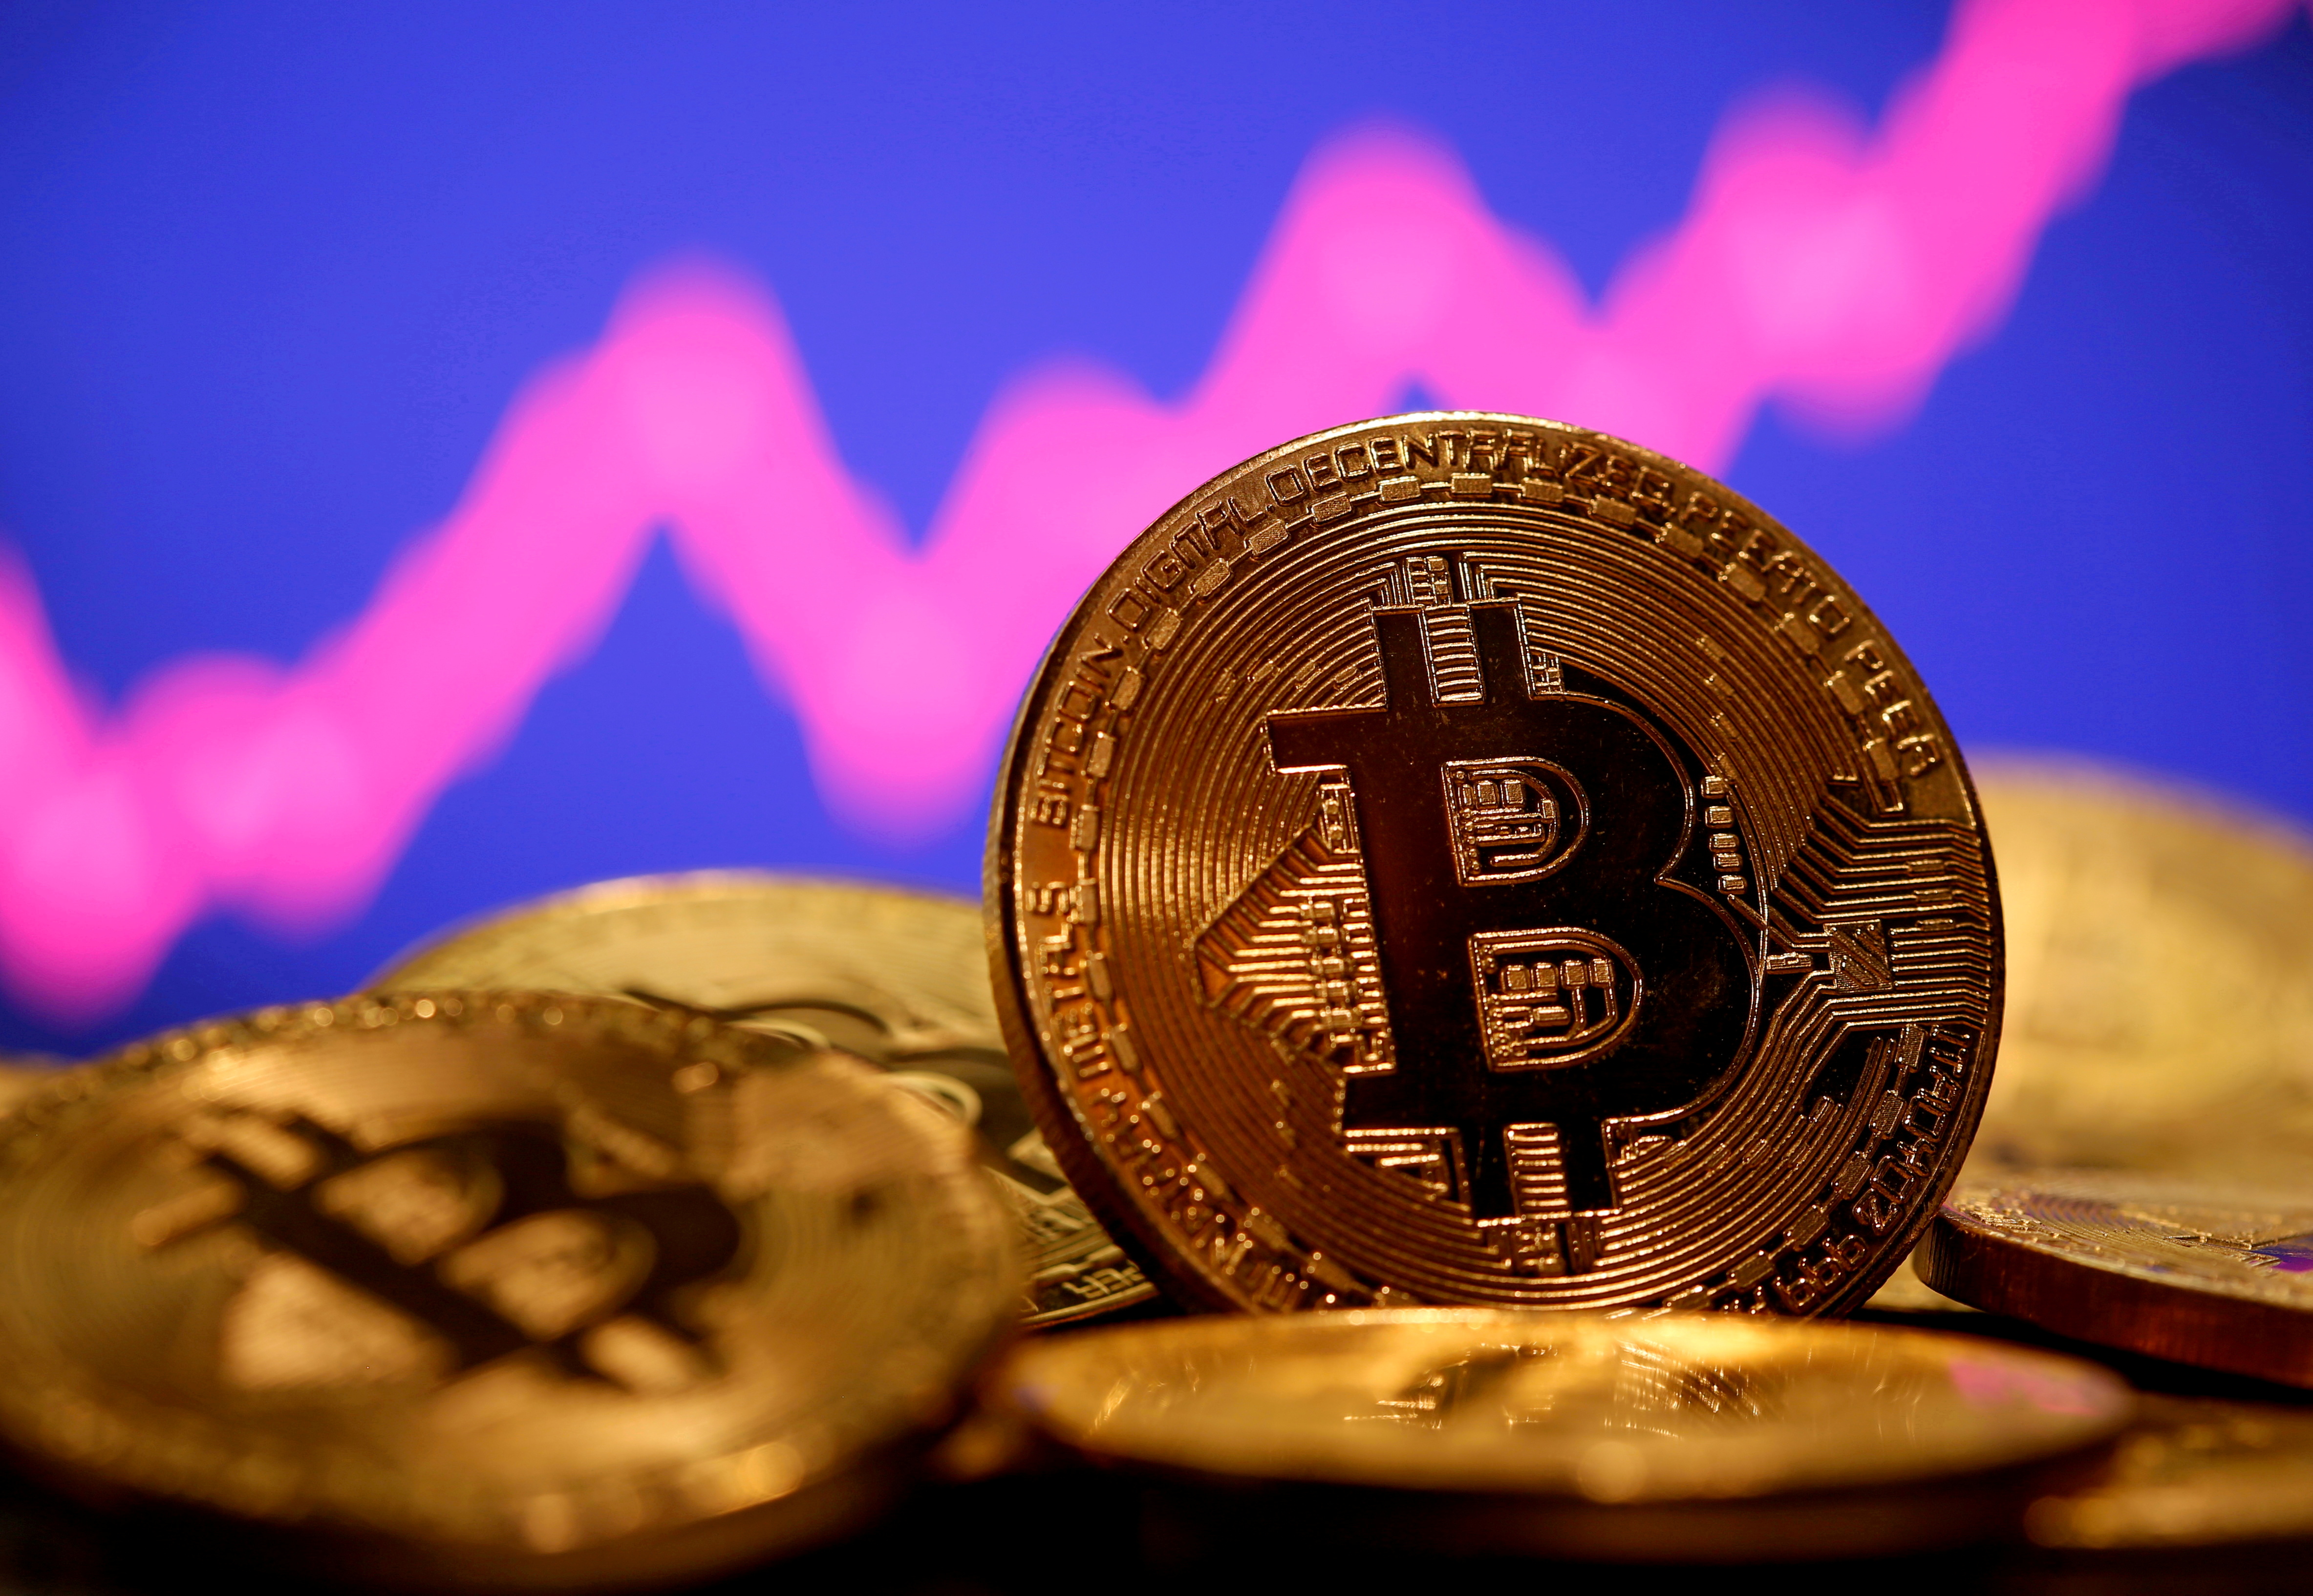 Watch this space: Volatility is bitcoin's main attraction, says Raoul Pal